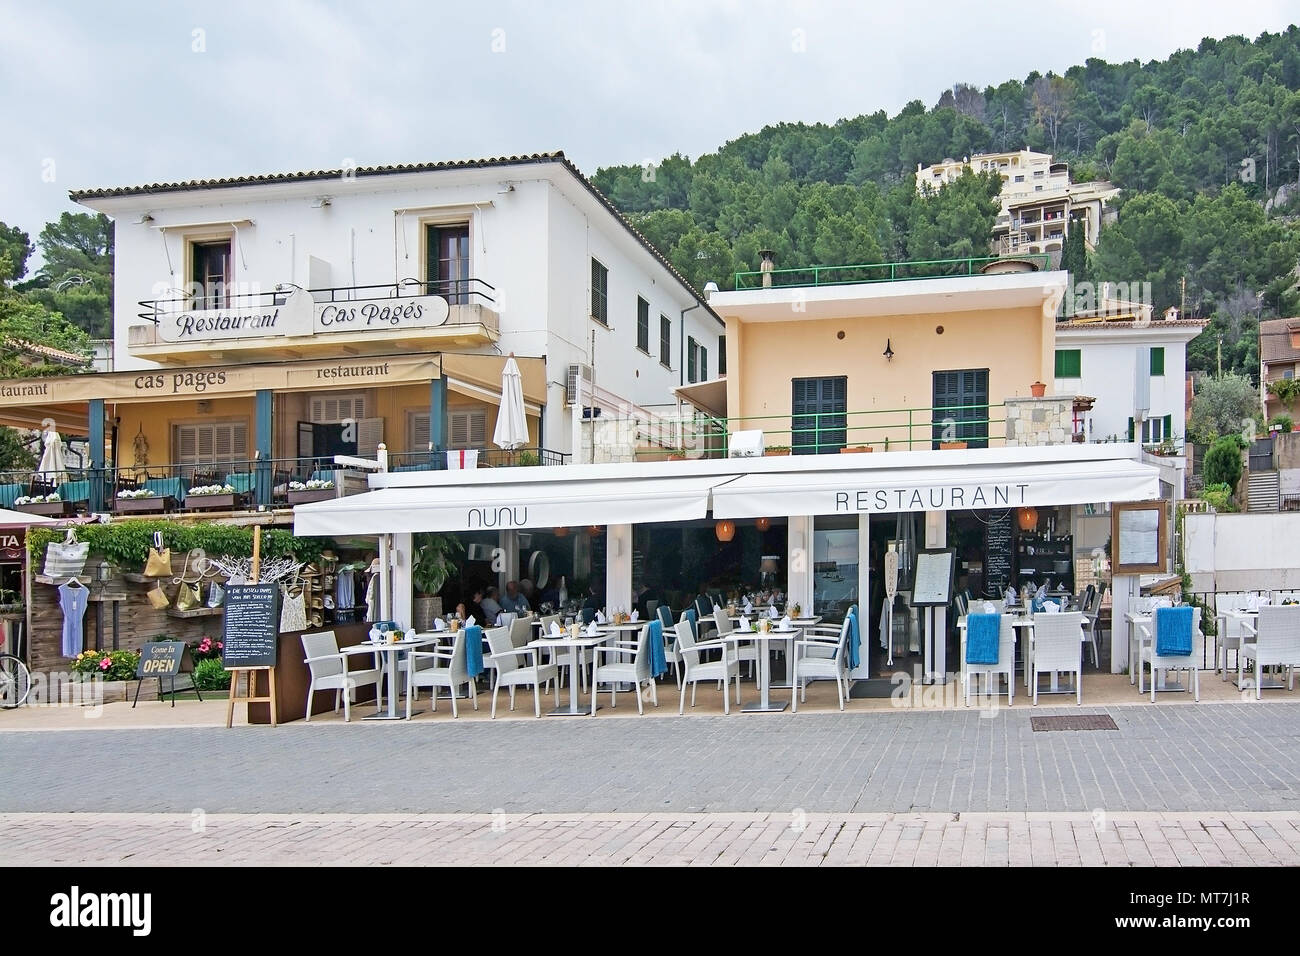 PUERTO SOLLER, MALLORCA, SPAIN - MAY 10, 2018: Souvenir shops and  restaurants in the marina on an overcast day on May 10, 2018 in Puerto  Soller, Mallo Stock Photo - Alamy